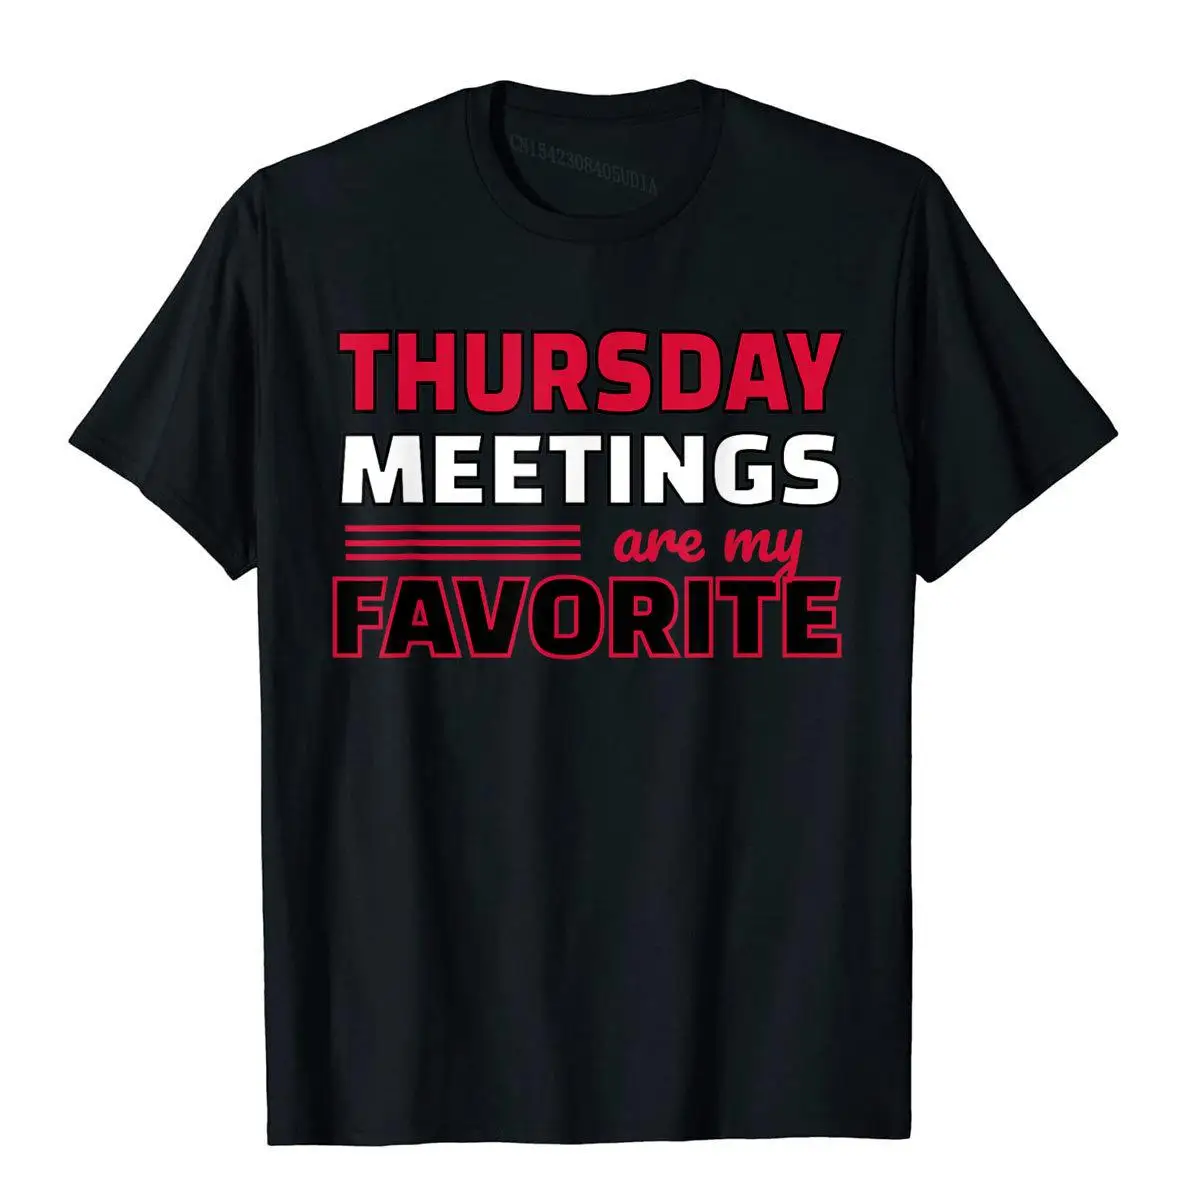 Thursday Meetings T-Shirt For Office Work Gift Printednovelty Tees High Quality Cotton Men's Top T-Shirts